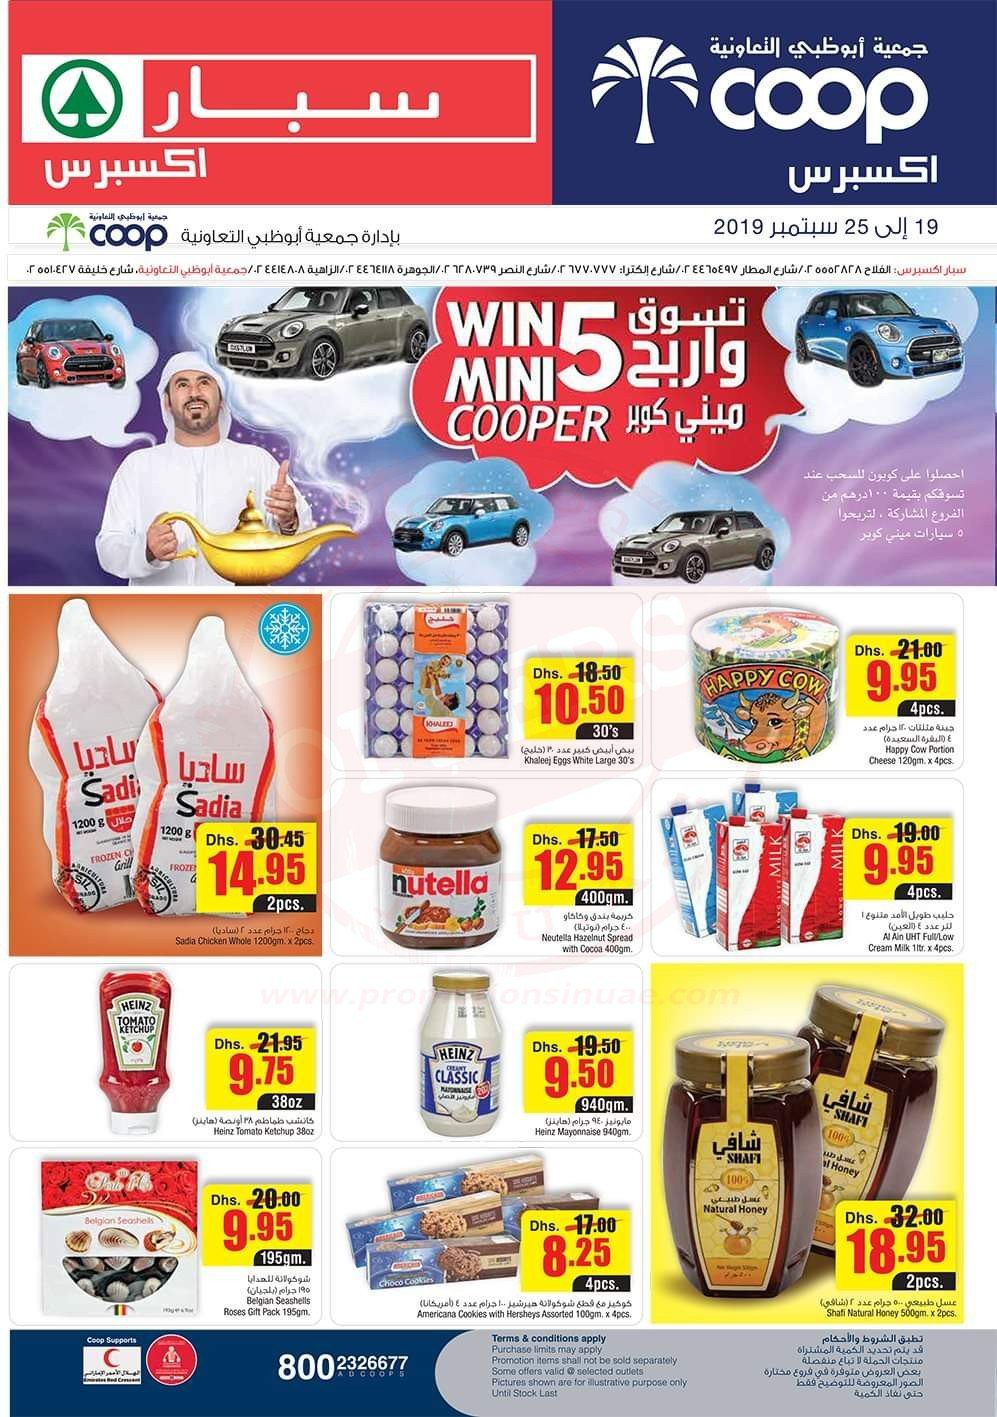 FB IMG 1568877582224 Shop for 100 AED worth to win 5 Mini Coopers